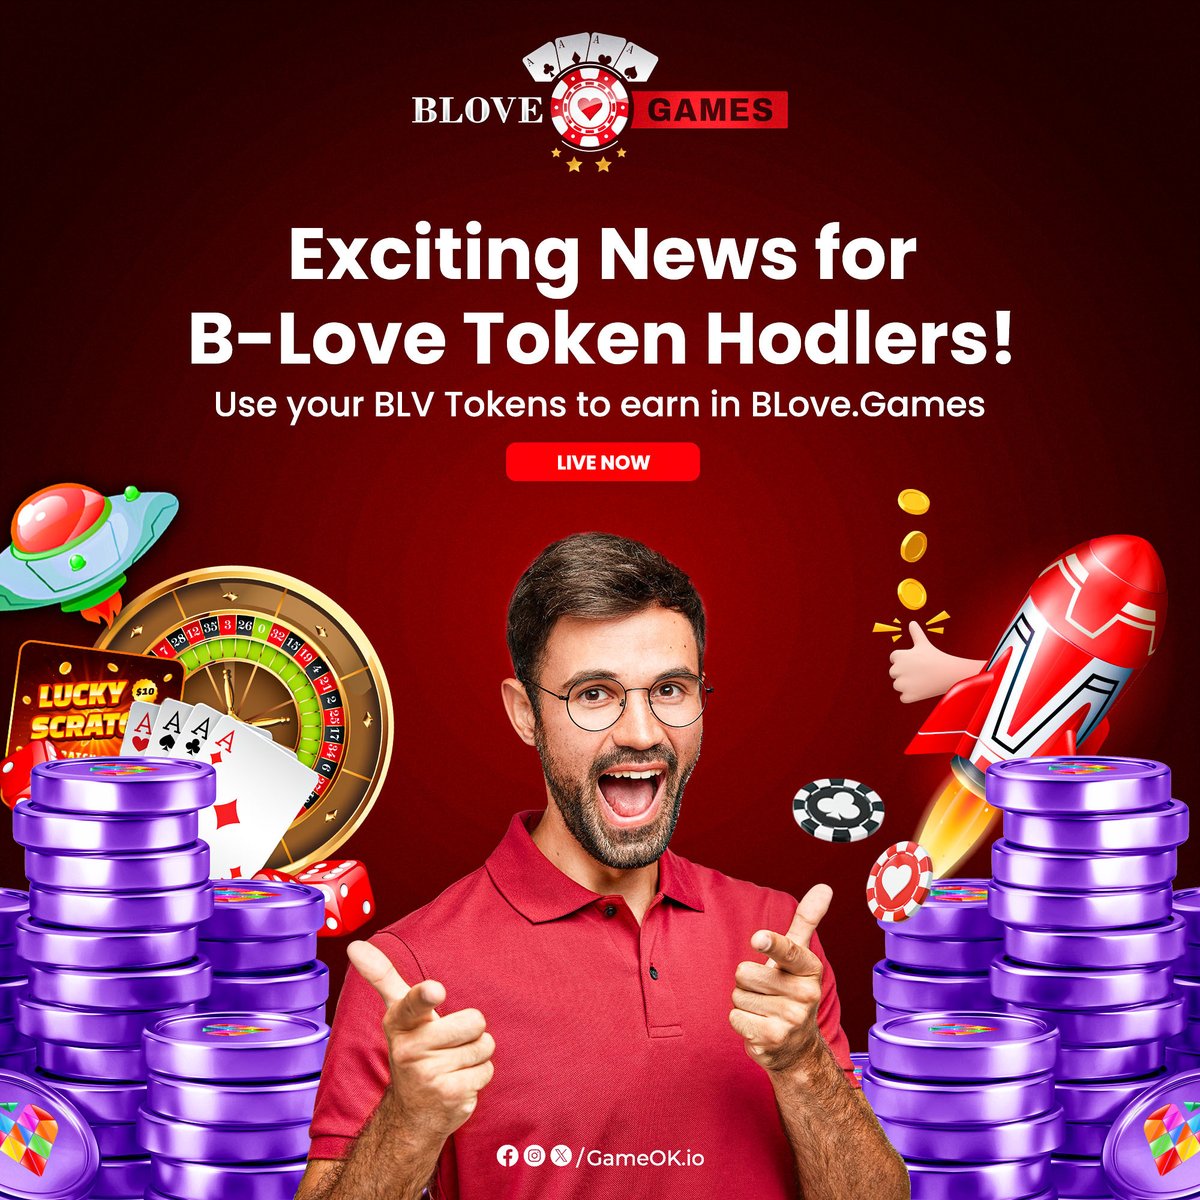 🚀 Calling All B-Love Token Hodlers! Big News! 

You can now use your BLVs to earn in BLove.Games

The excitement begins now! Join the gaming revolution! 🌟

#BLoveGames #EarnWithBLVs #GameOK #BFICoin #GameFi #P2E #OnlineGaming #Live